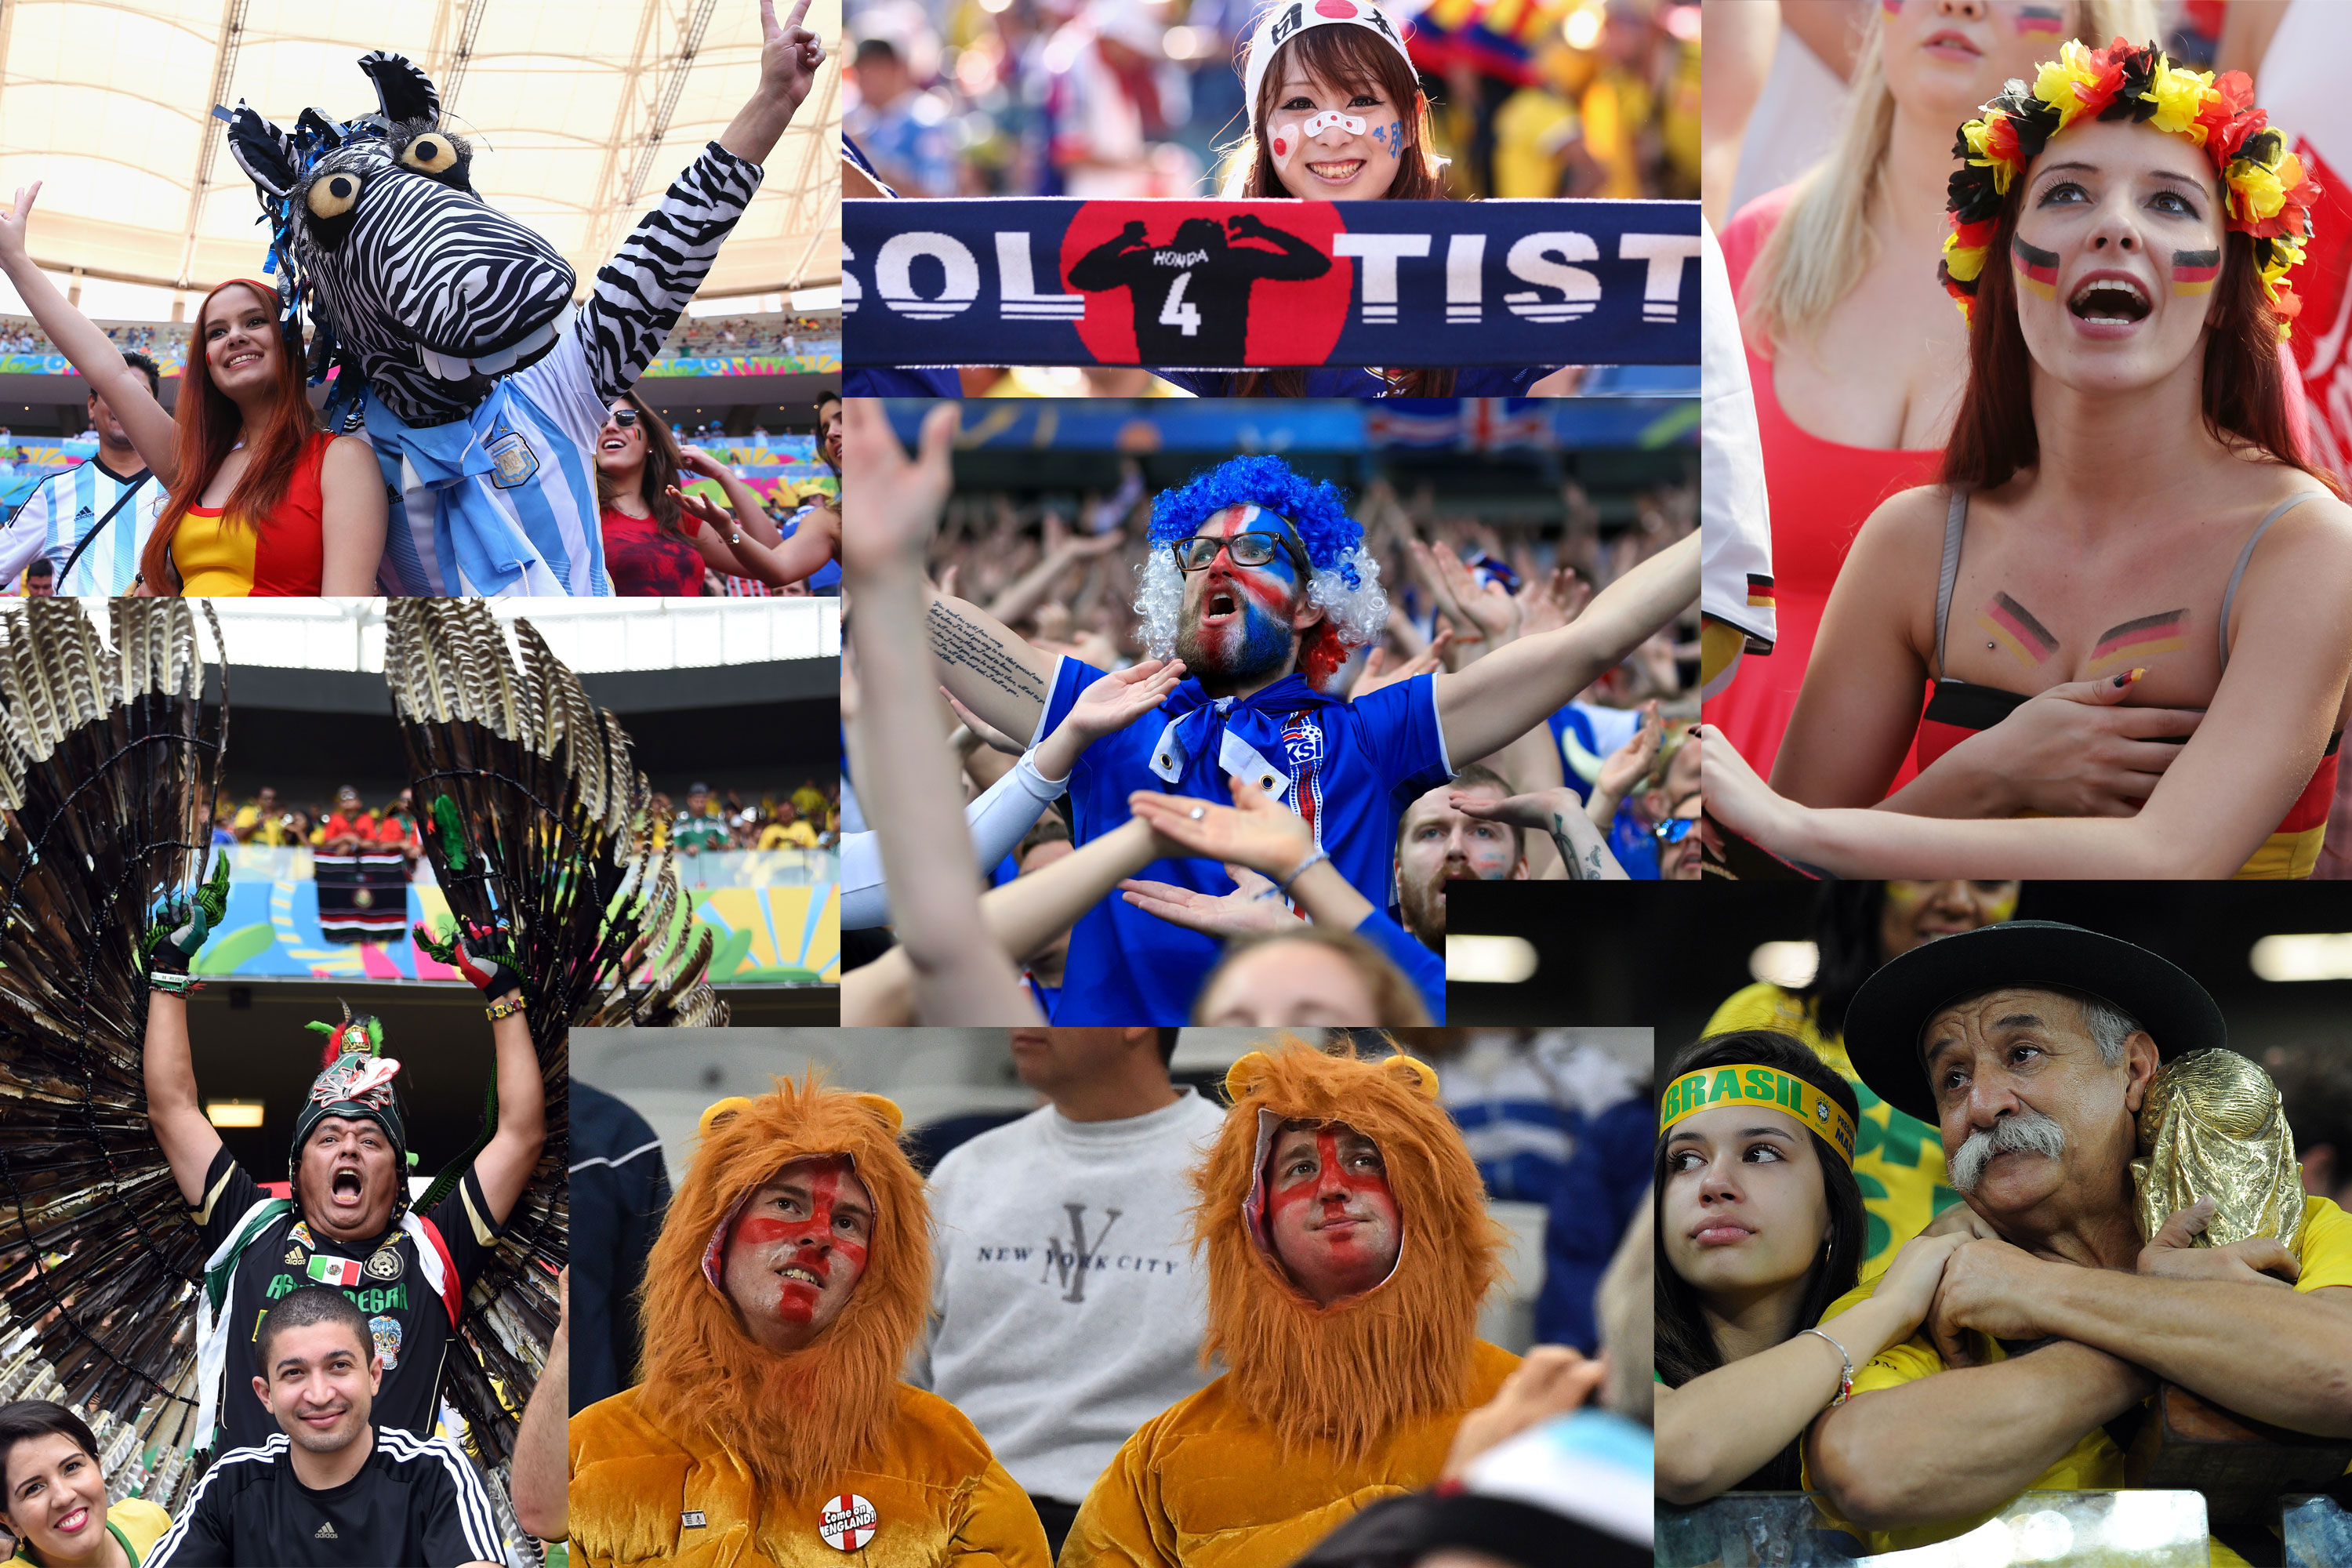 Welcome to the Alternative 2018 World Cup Fans' Guide